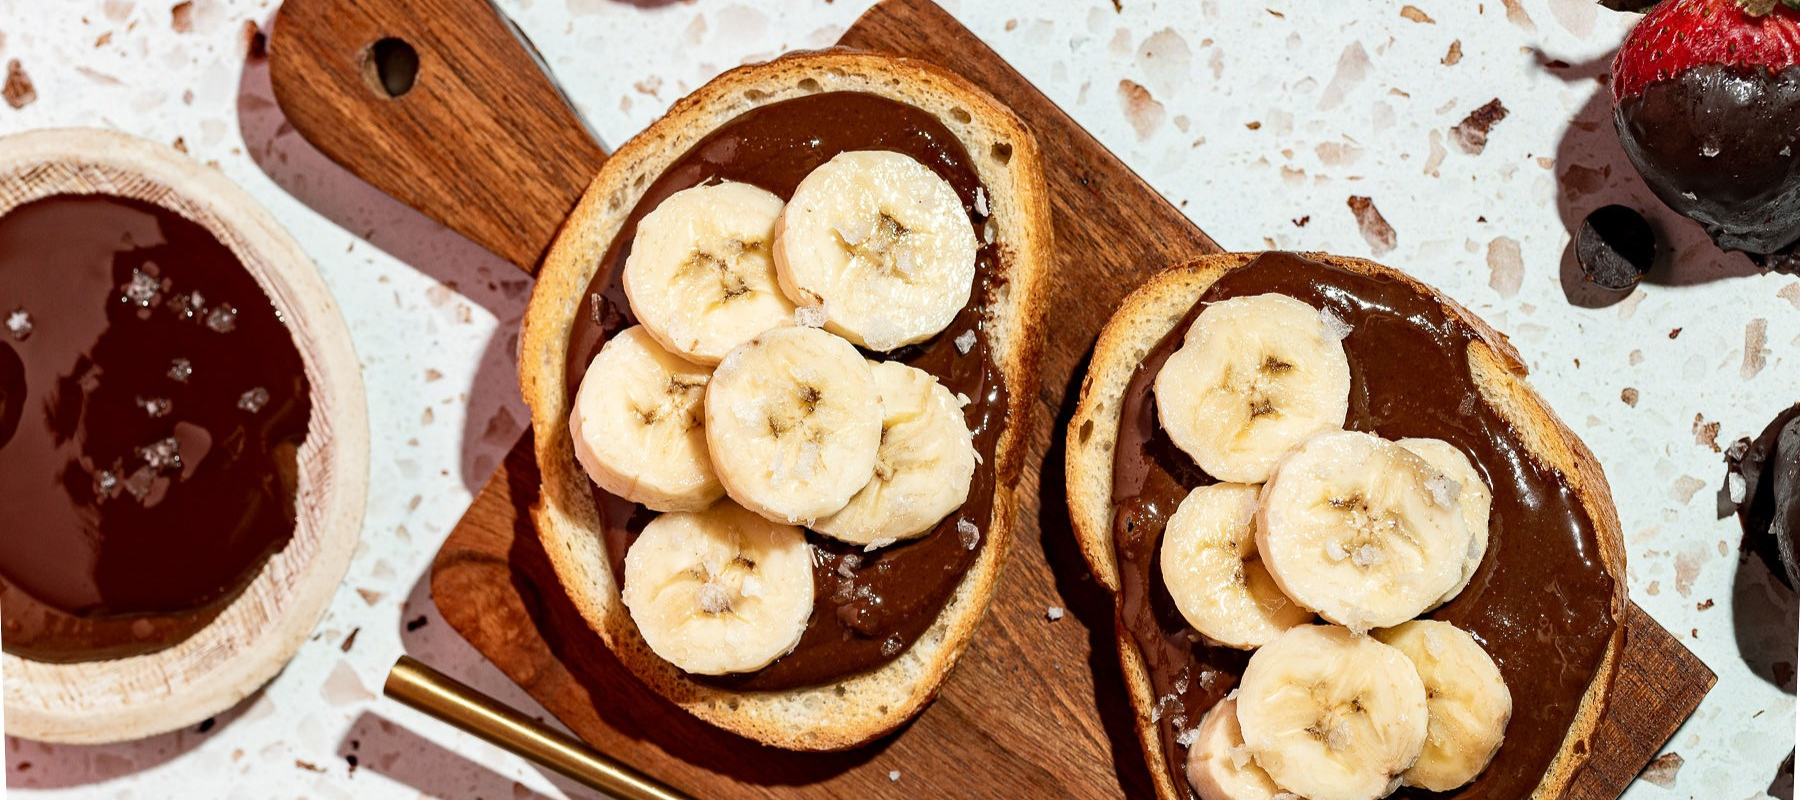 Georgia Grinders Healthy Nutella spread on toast with banana slices